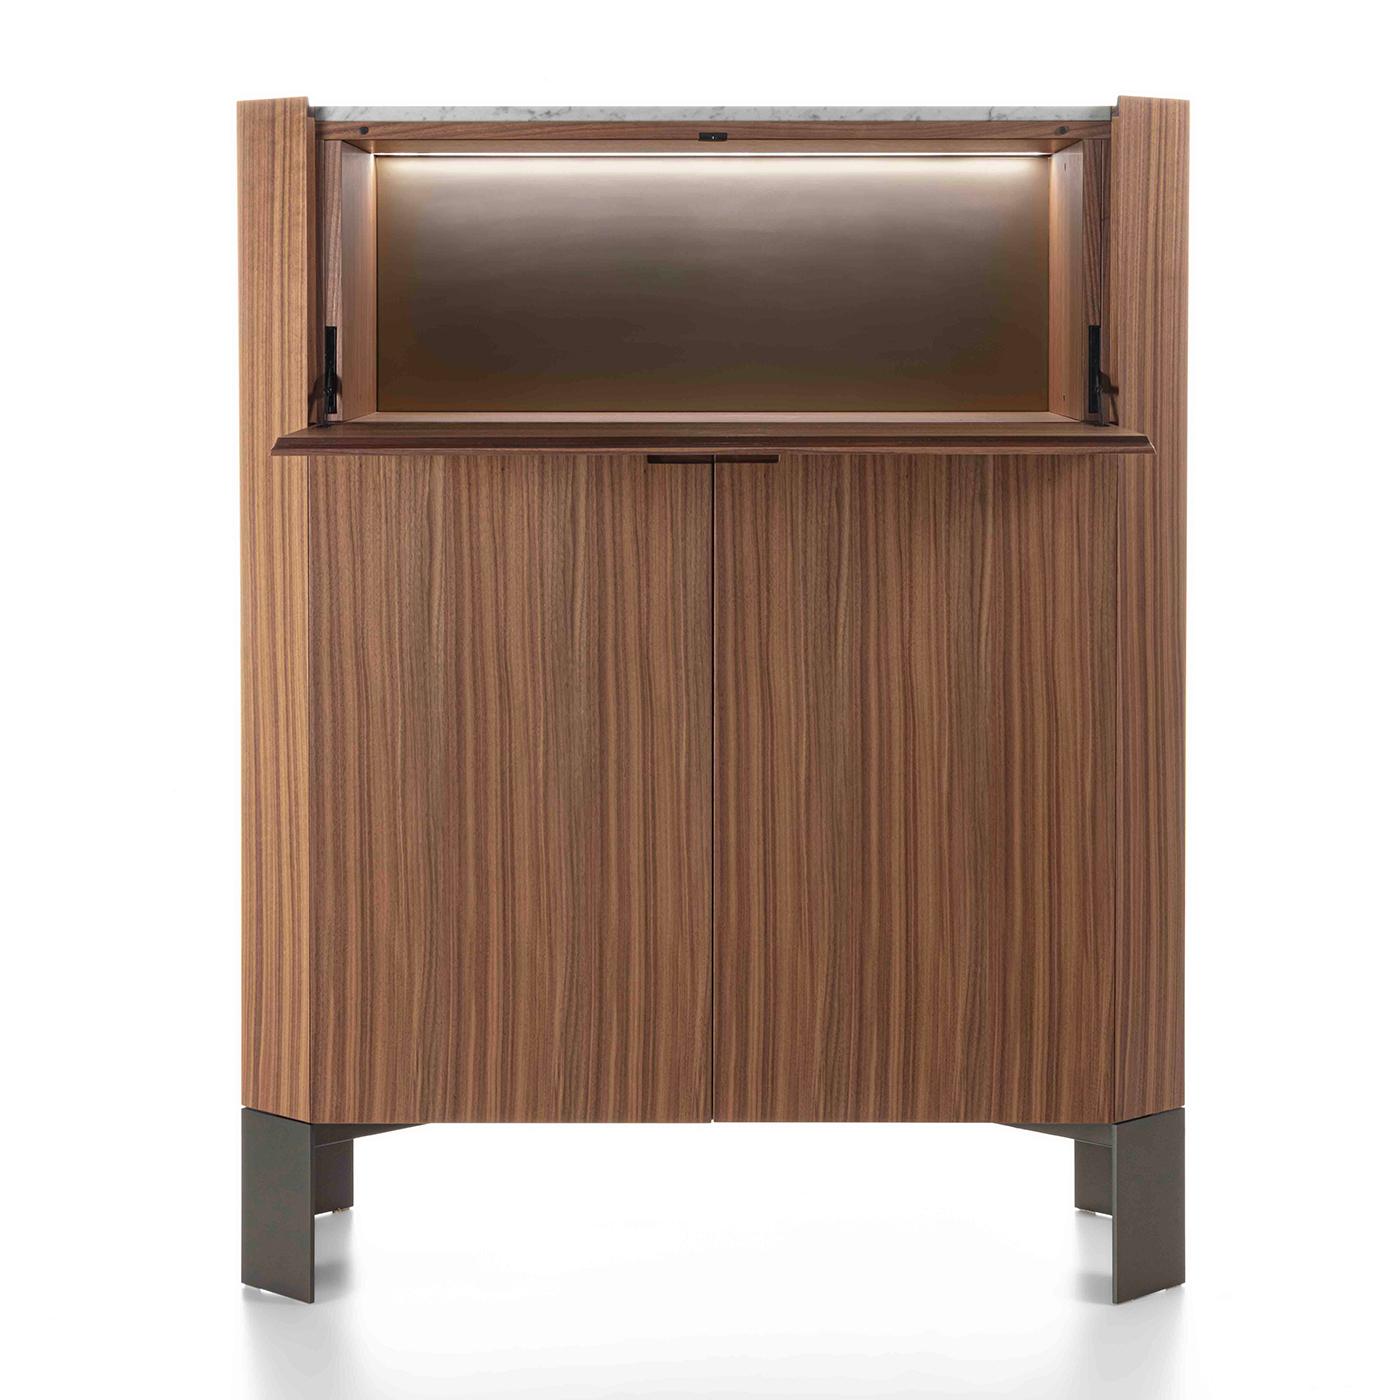 This remarkable bar cabinet in solid Canaletto walnut is distinguished by its characteristic warm tone and rich grain. A cabinetmaking gem brimming with geometric inspiration, the entire structure features a rigorously-sculpted profile that pools